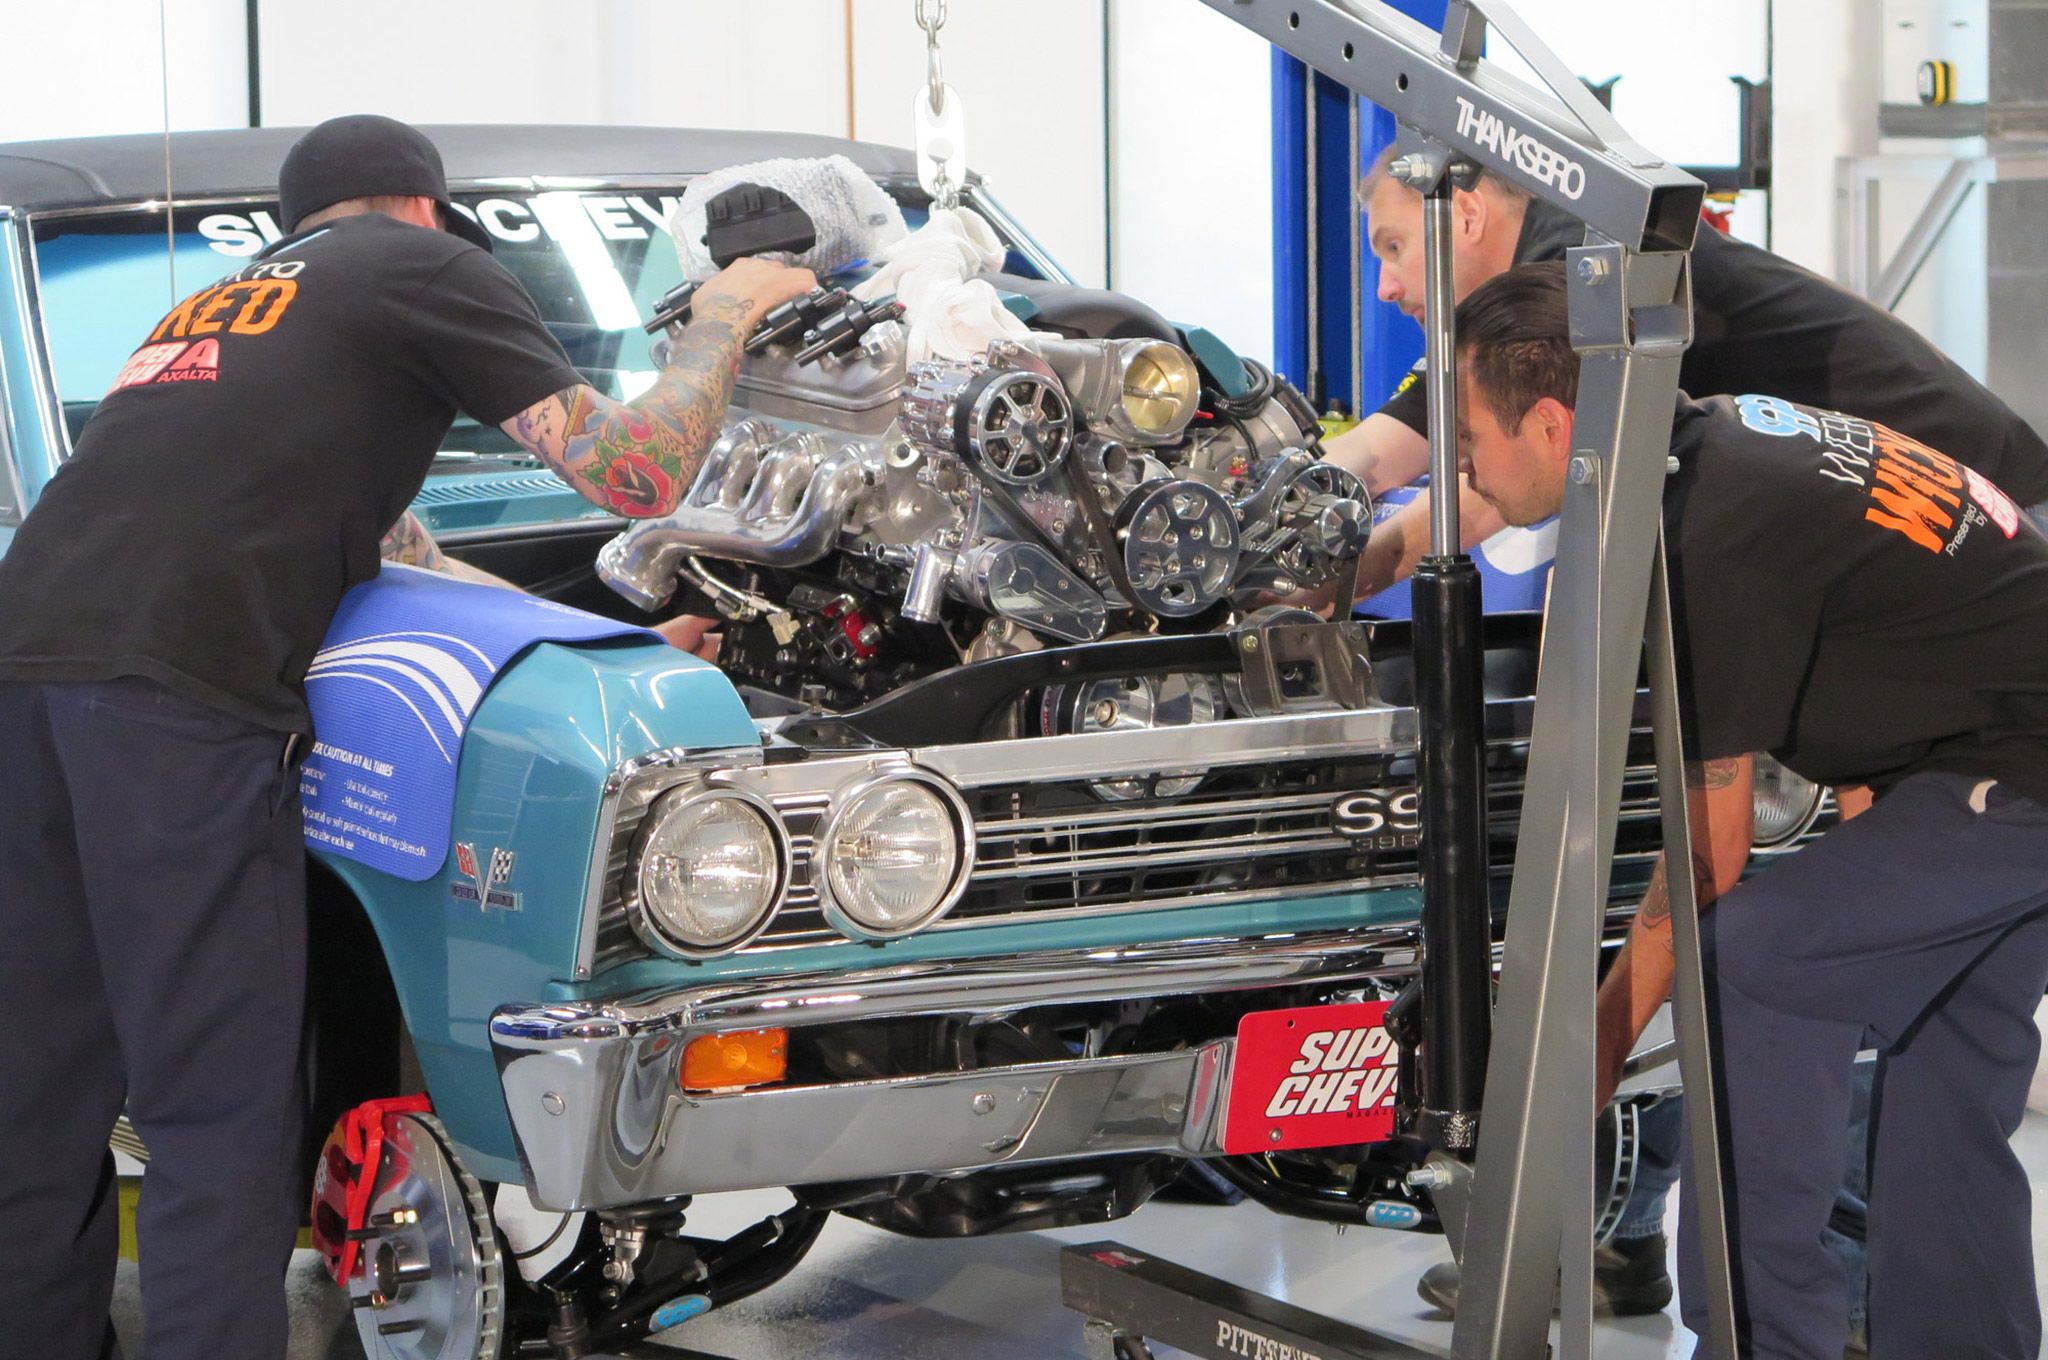 096-week-to-wicked-cpp-axalta-super-chevy-chevelle-day-2-suspension-blueprint-427-ls3-install-eddie-motorsports-billet-pulley-drive-system 